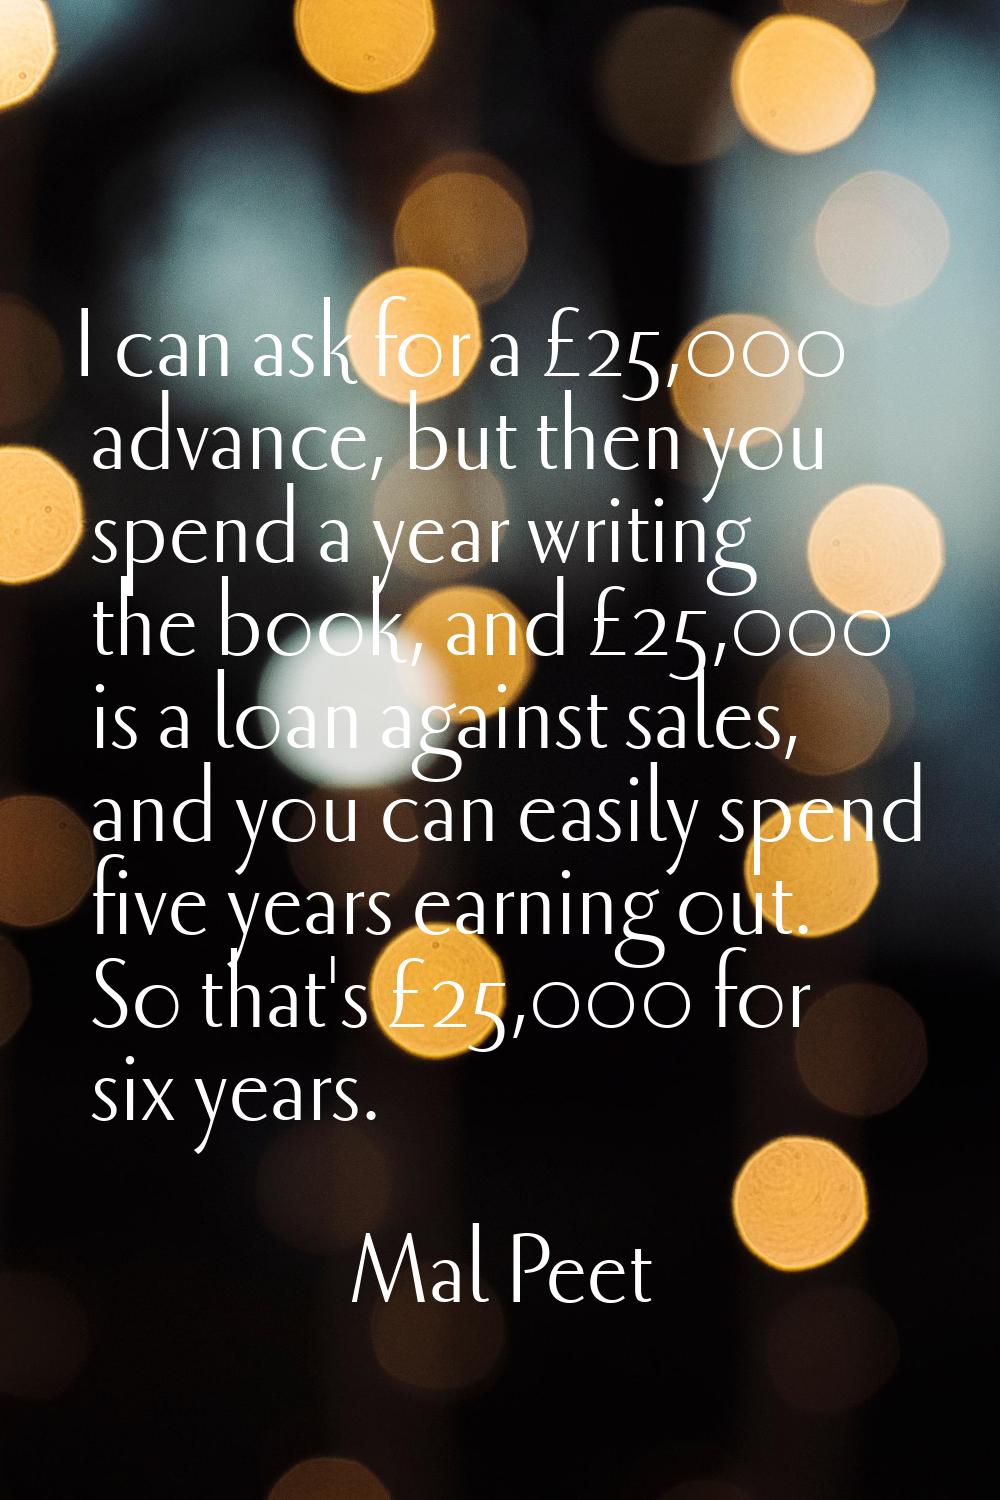 I can ask for a £25,000 advance, but then you spend a year writing the book, and £25,000 is a loan 